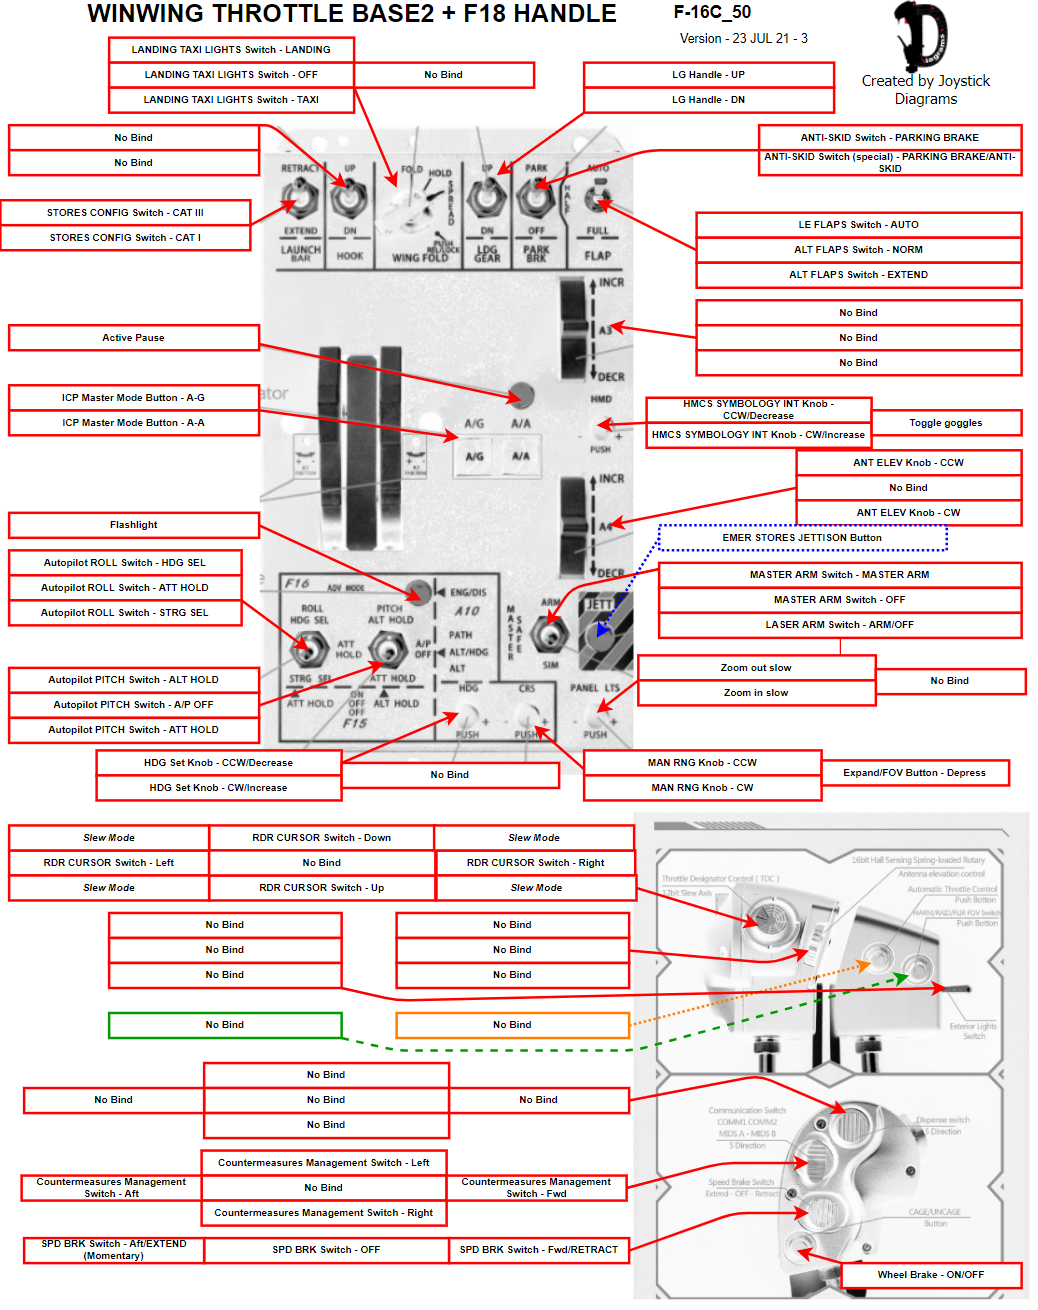 Joystick Diagrams Templates for WinWing Orion F-18